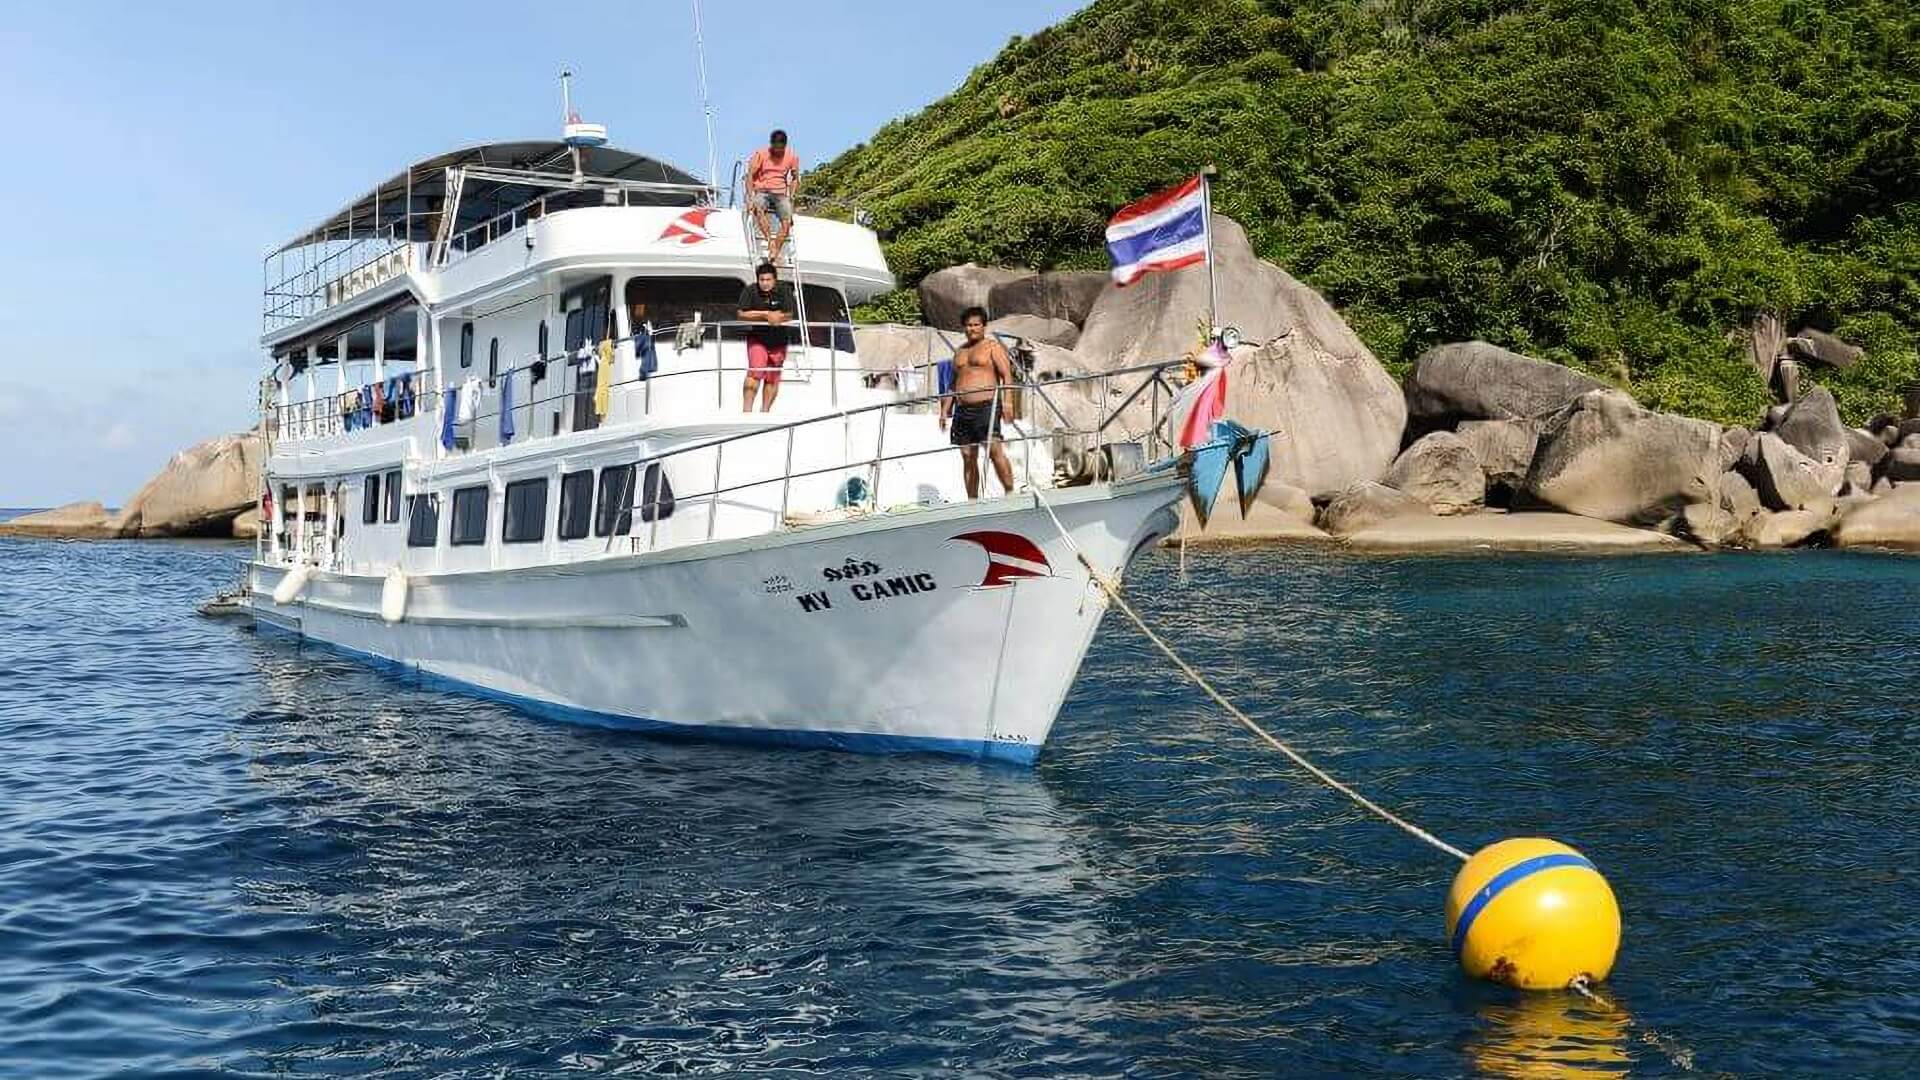 MV Camic – Great Price With Just 14 Guests